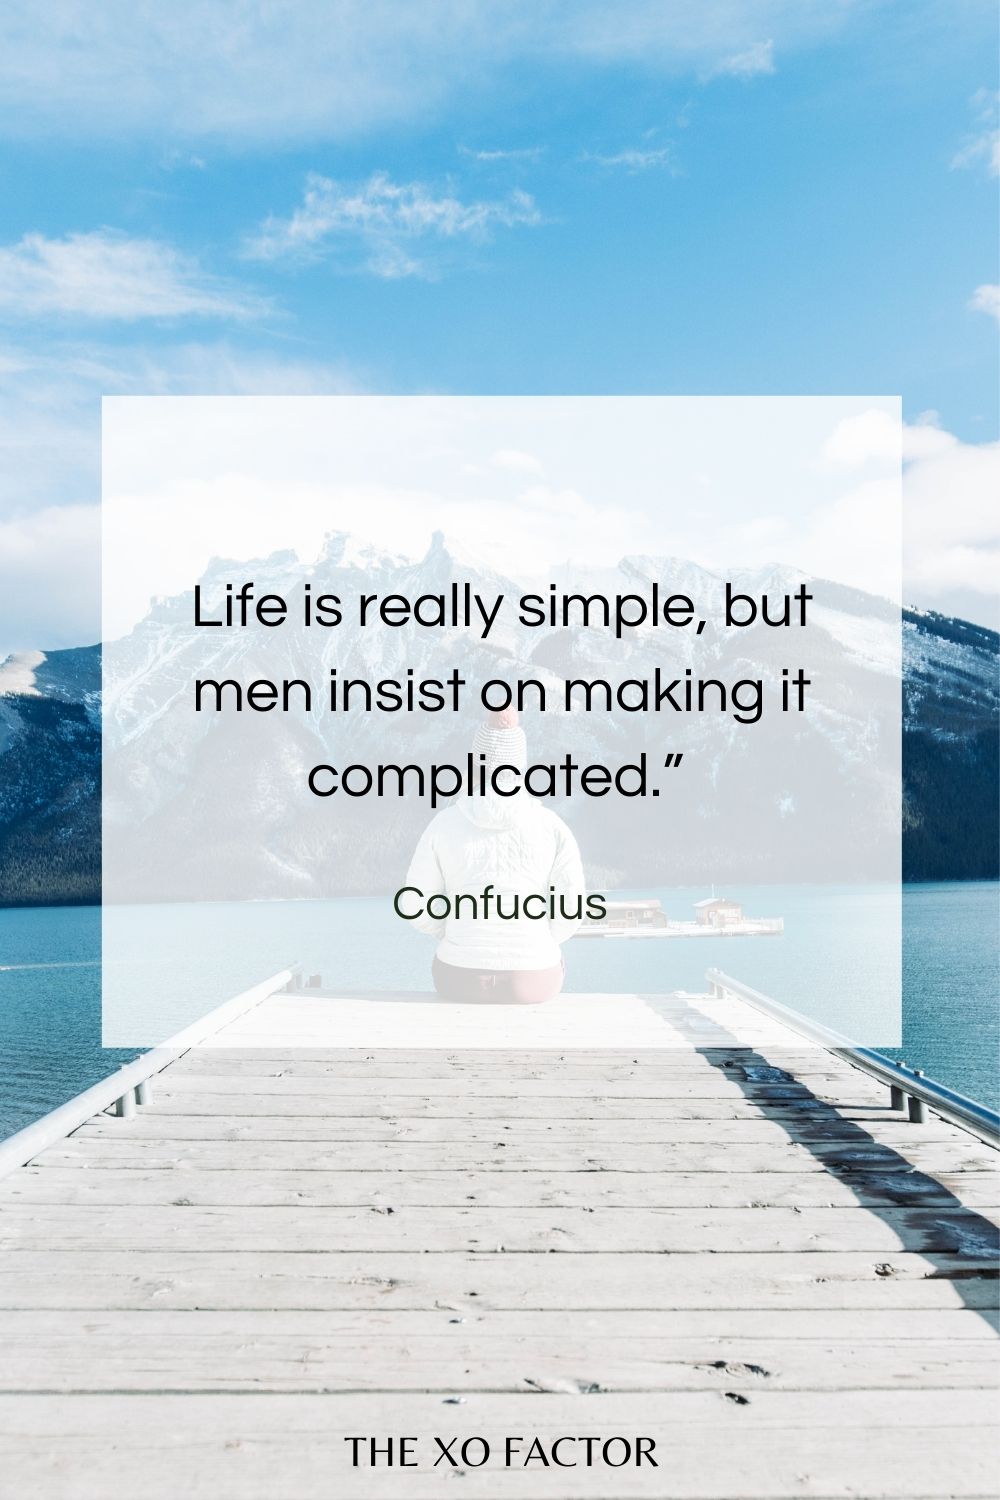 Life is really simple, but men insist on making it complicated.”  Confucius